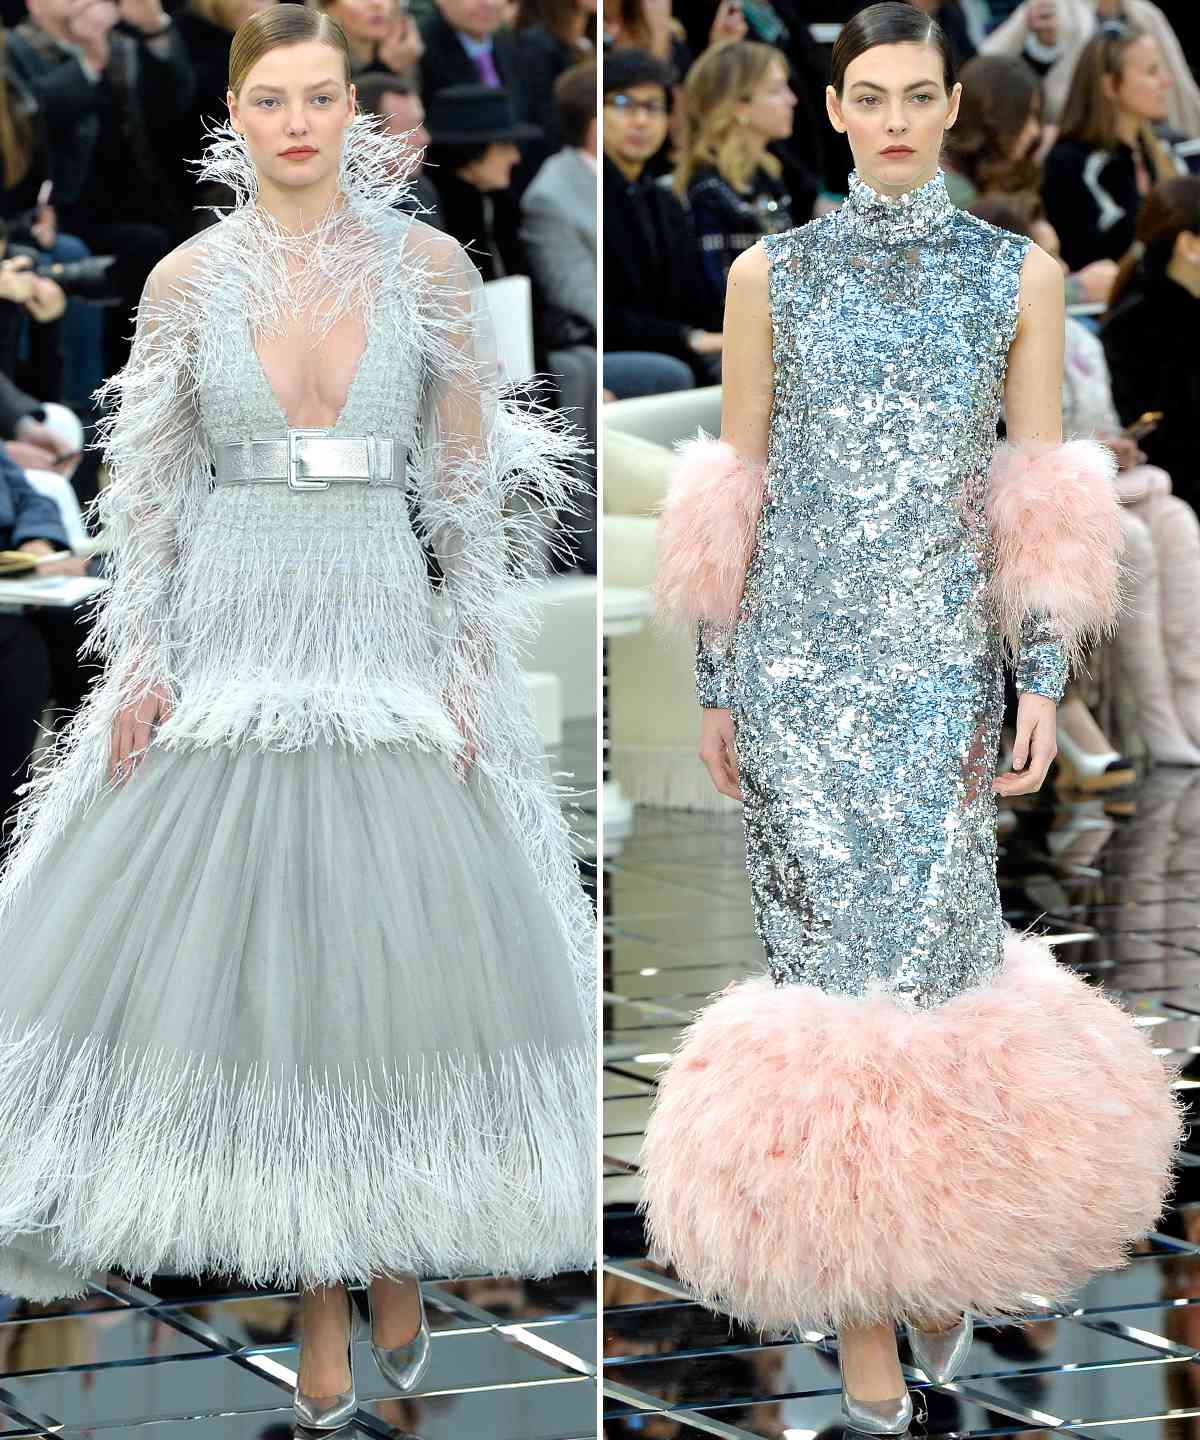 Eric CFW Review - Chanel